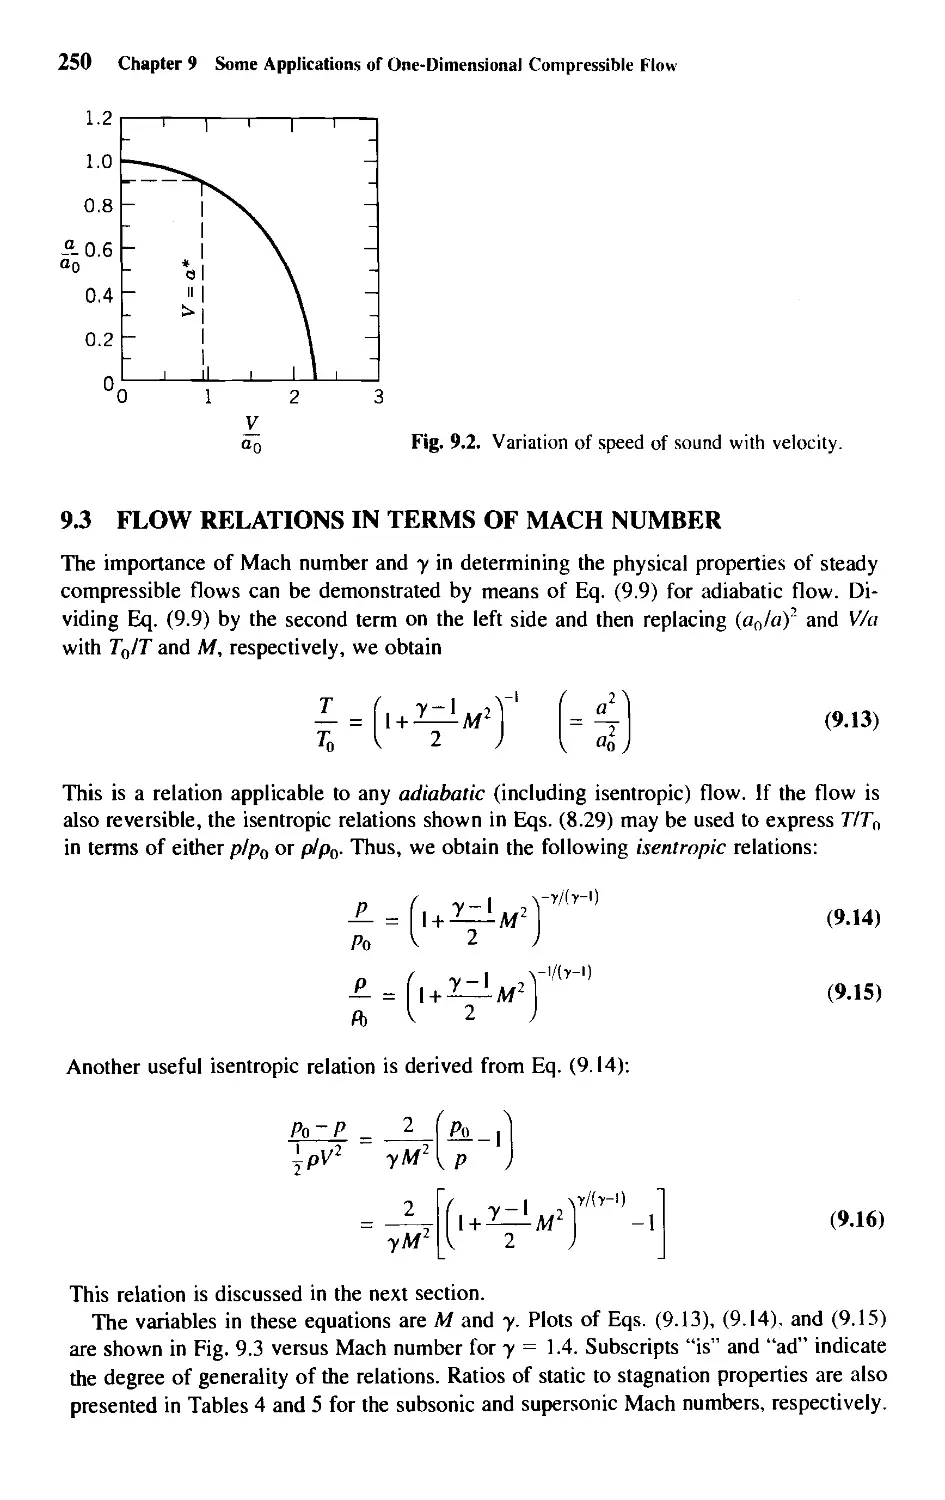 9.3 - Flow Relations in Terms of Mach Number